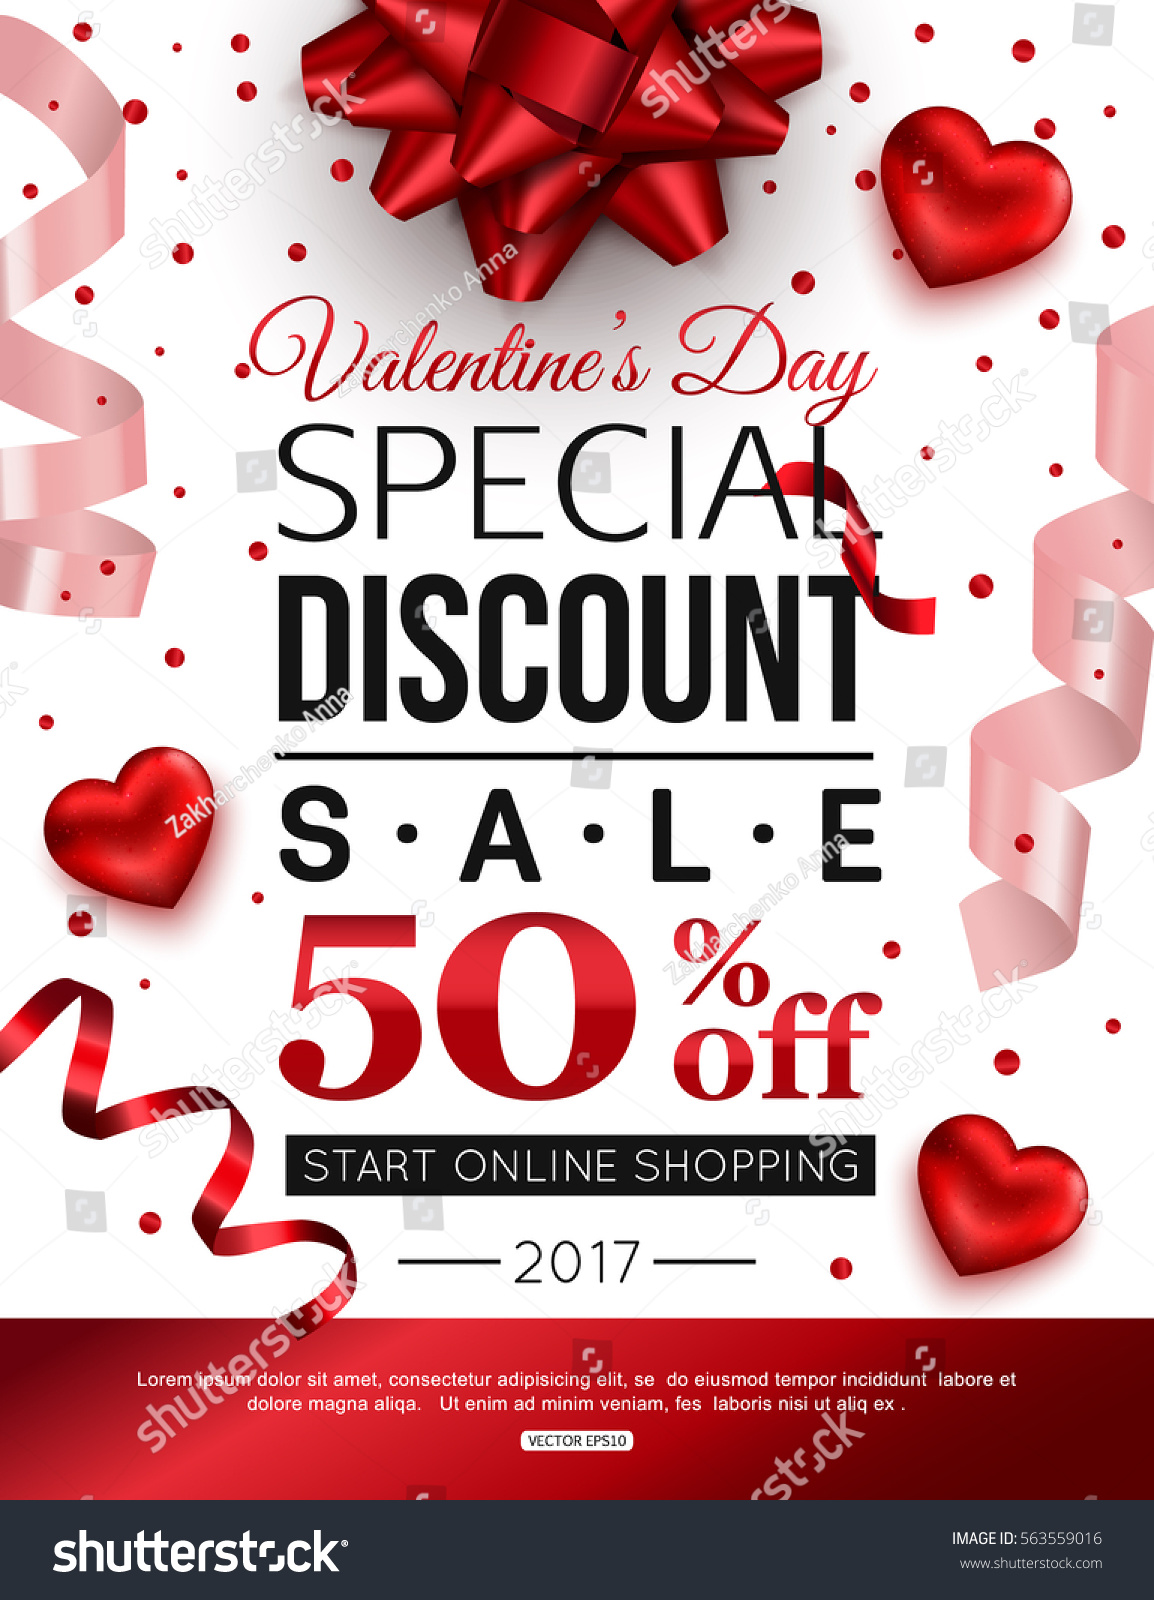 Valentines Day Special Discount Online Shopping Vectores 